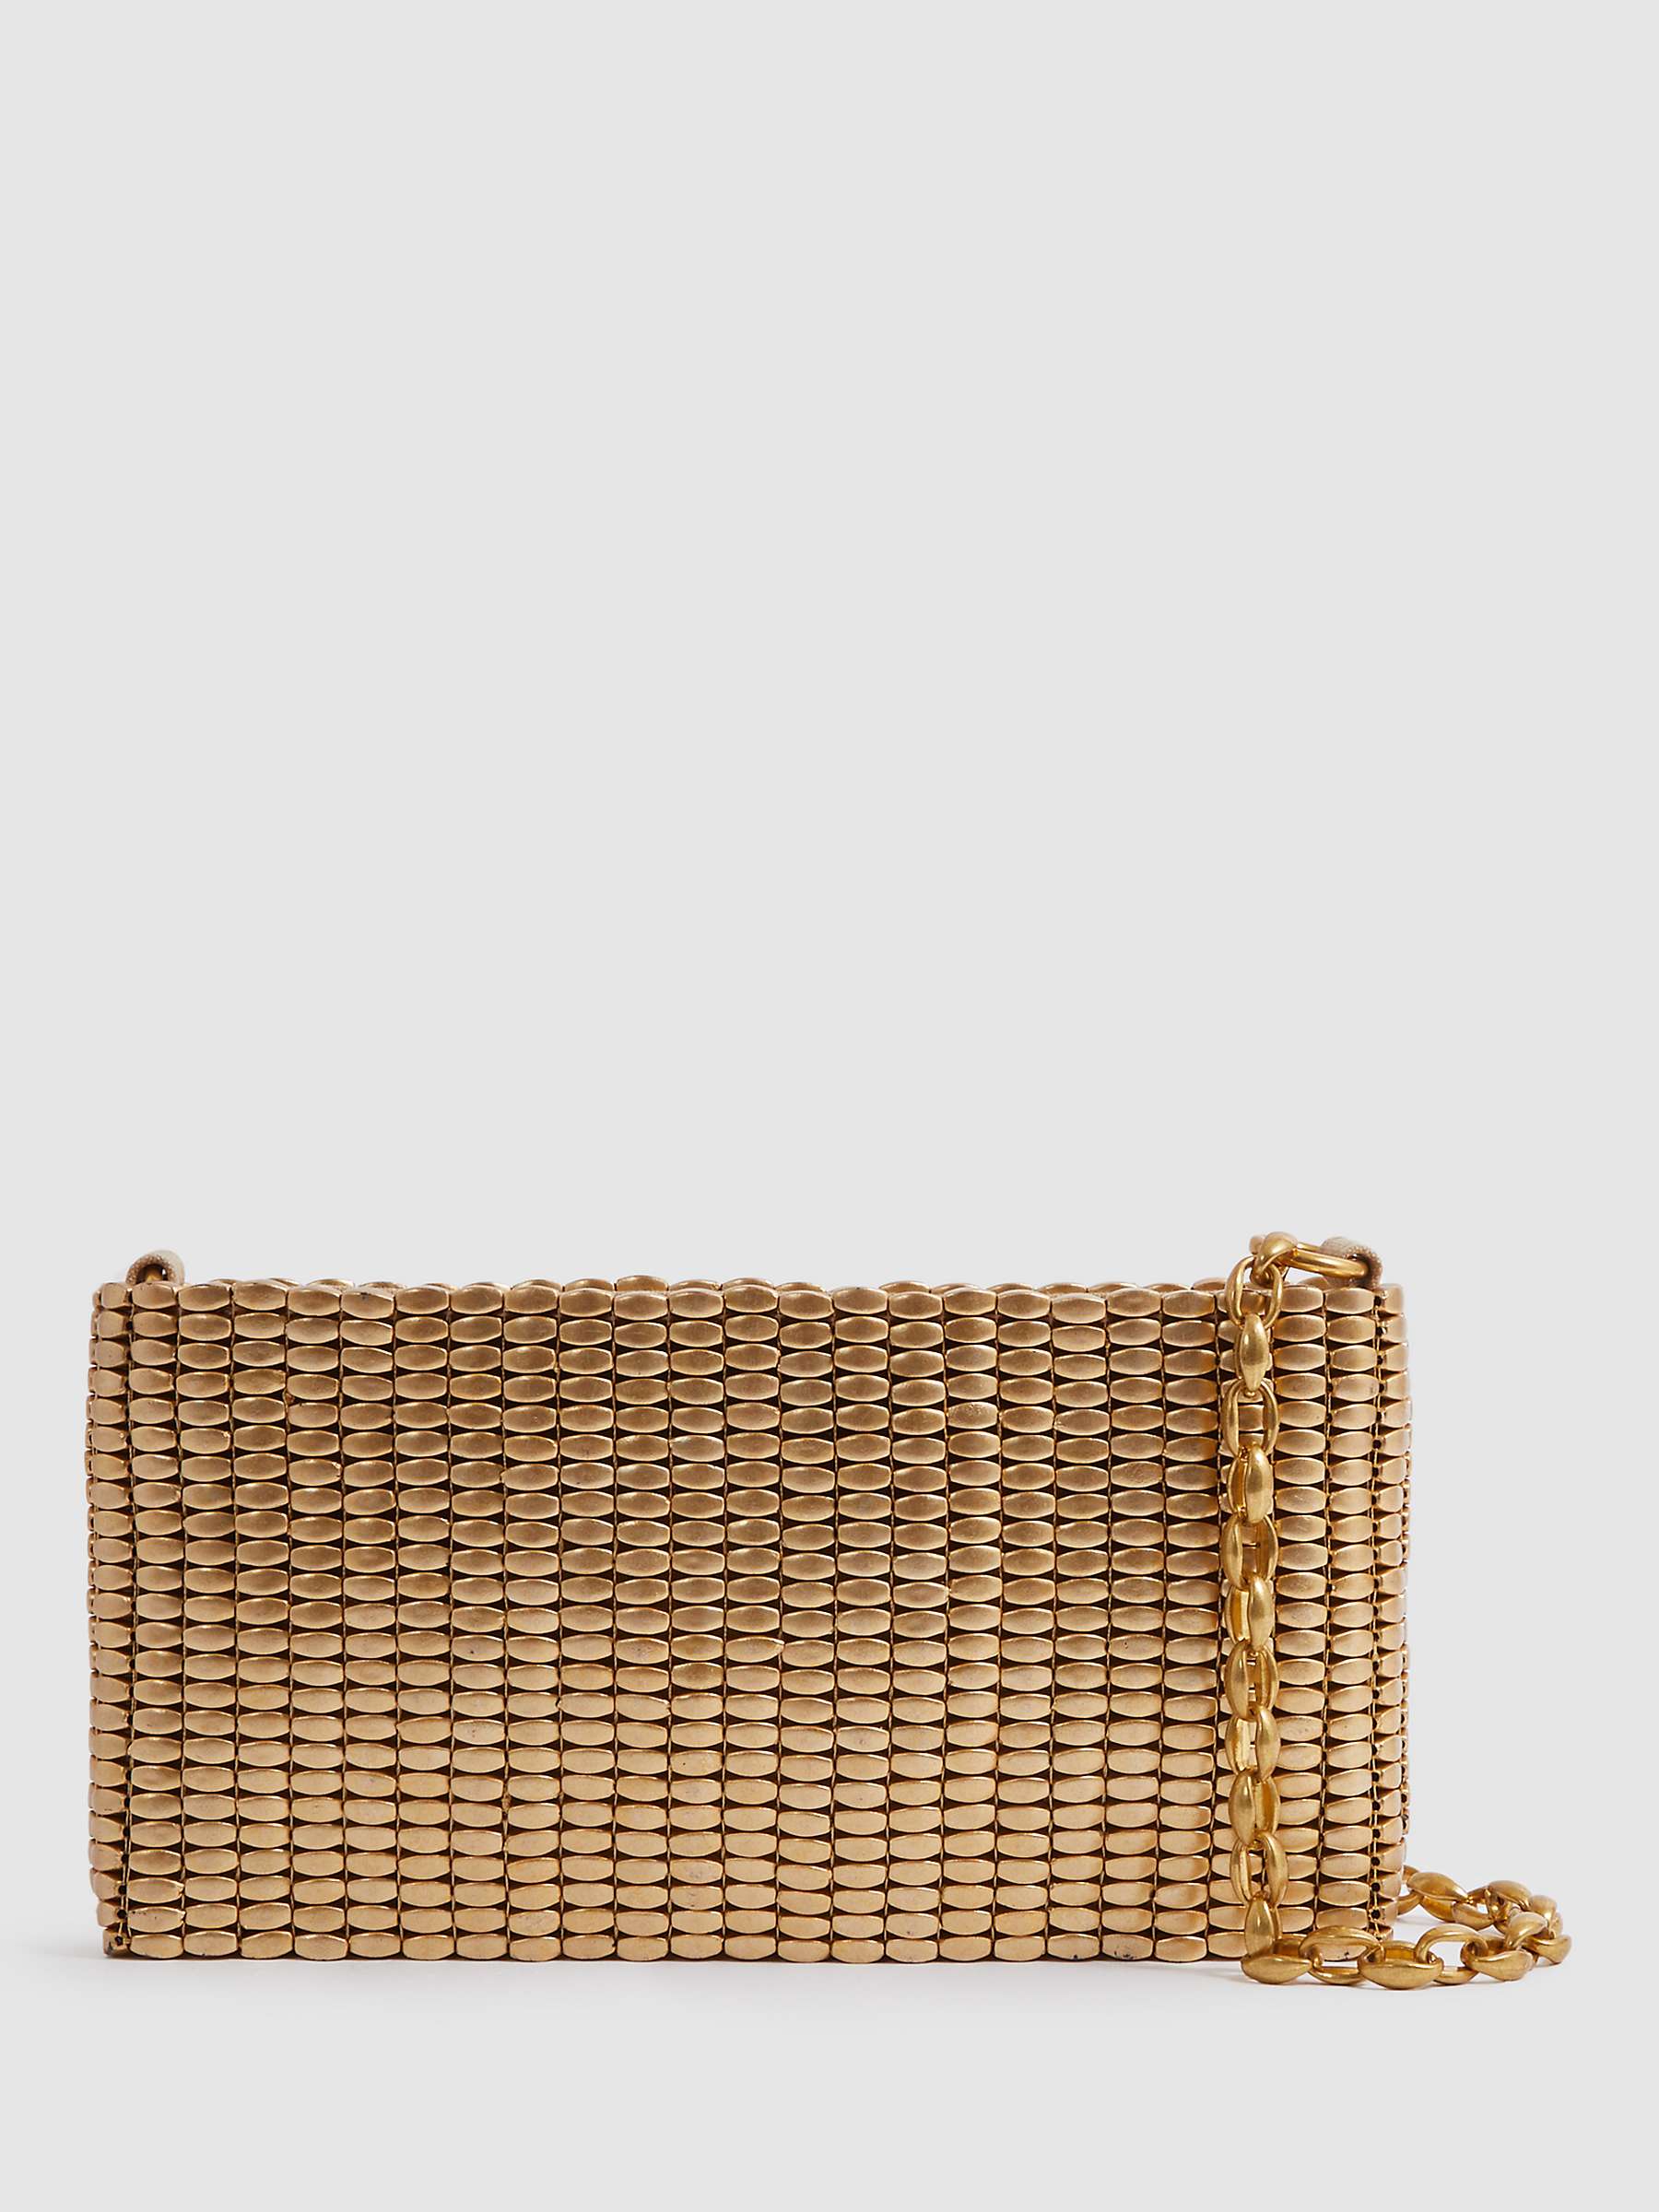 Buy Reiss Bailey Beaded Clutch Bag, Gold Online at johnlewis.com